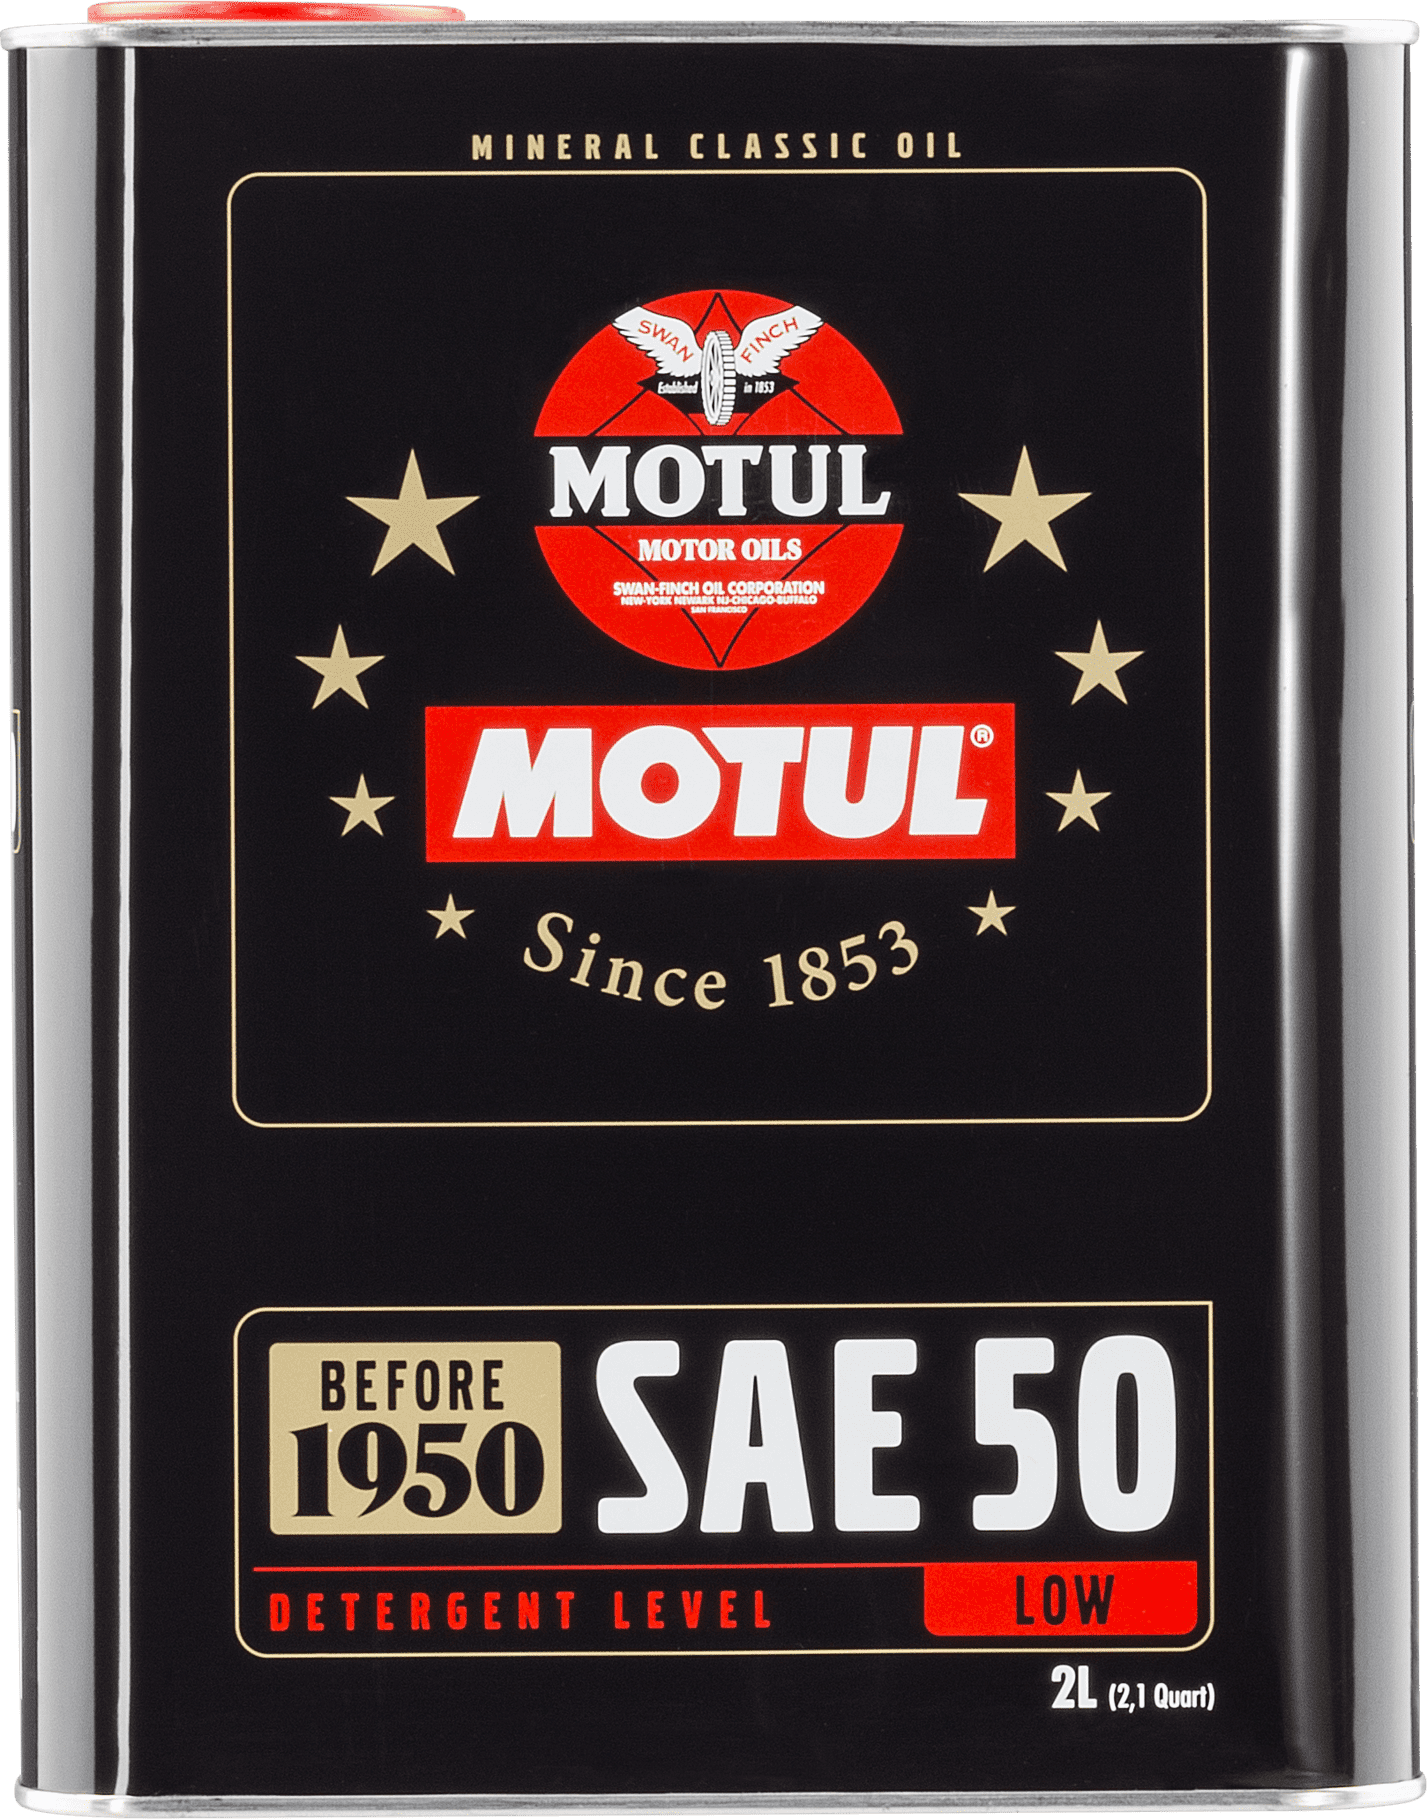 104510-2 Mineral engine lubricant perfectly suitable for original engines as well as gearboxes built between 1900 and 1950.